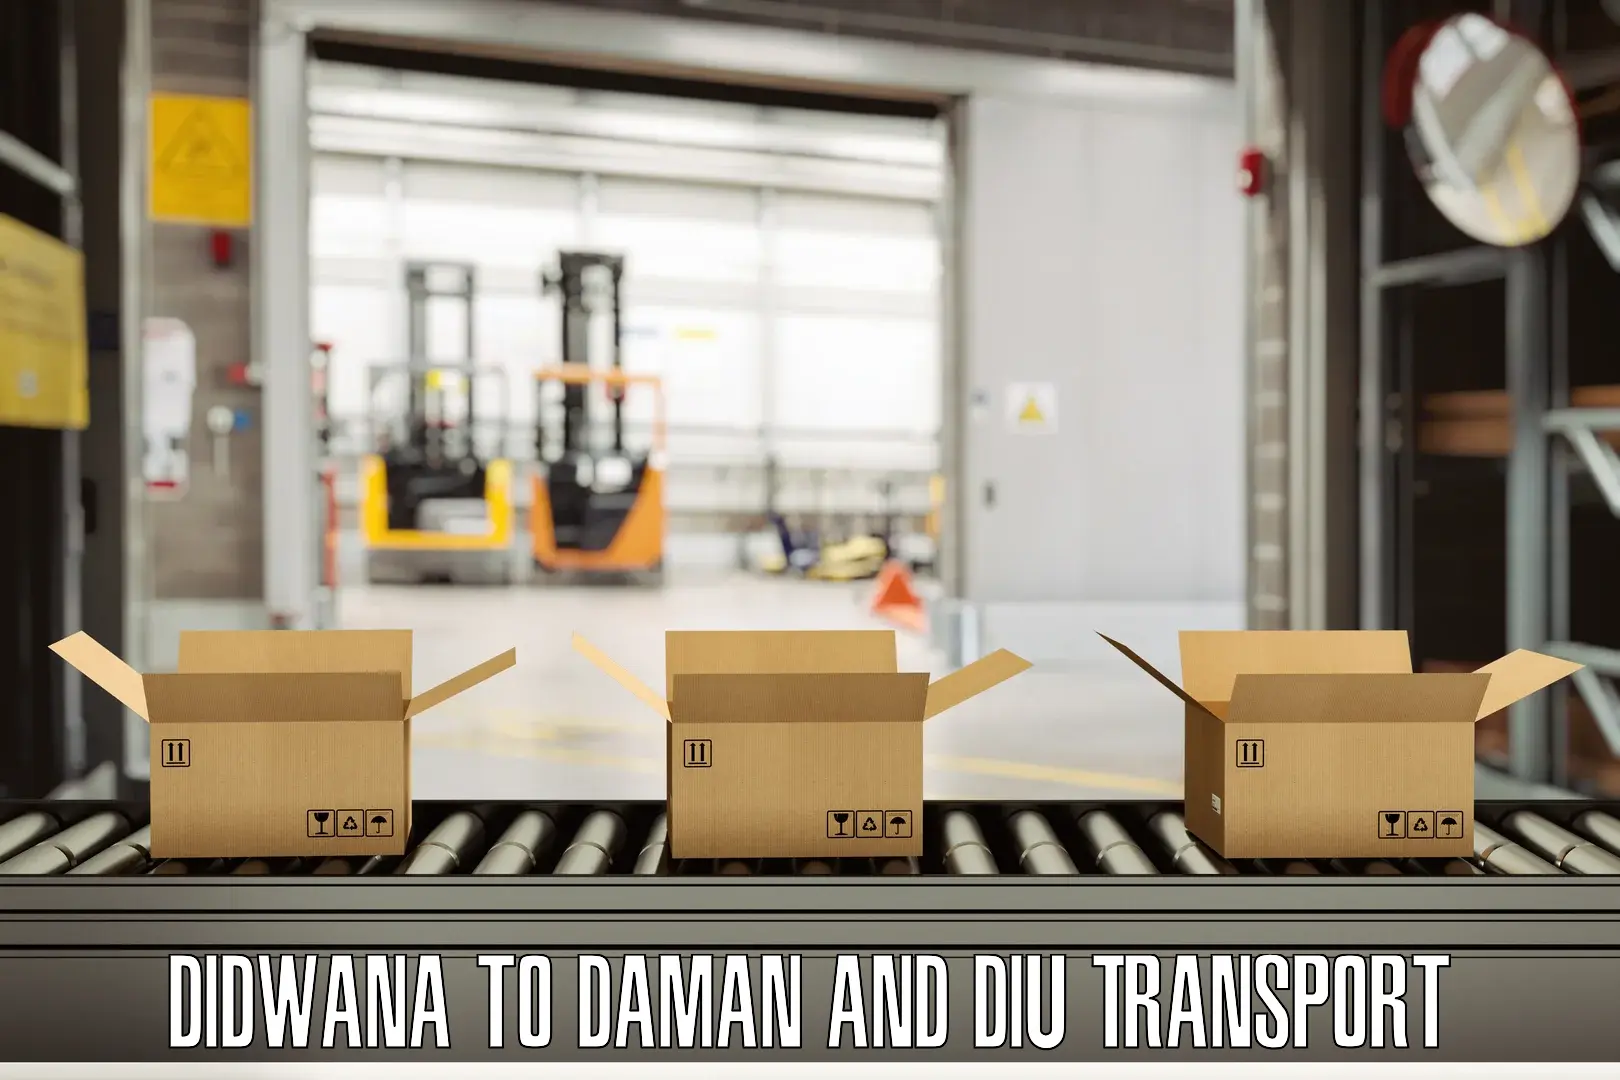 Parcel transport services Didwana to Daman and Diu